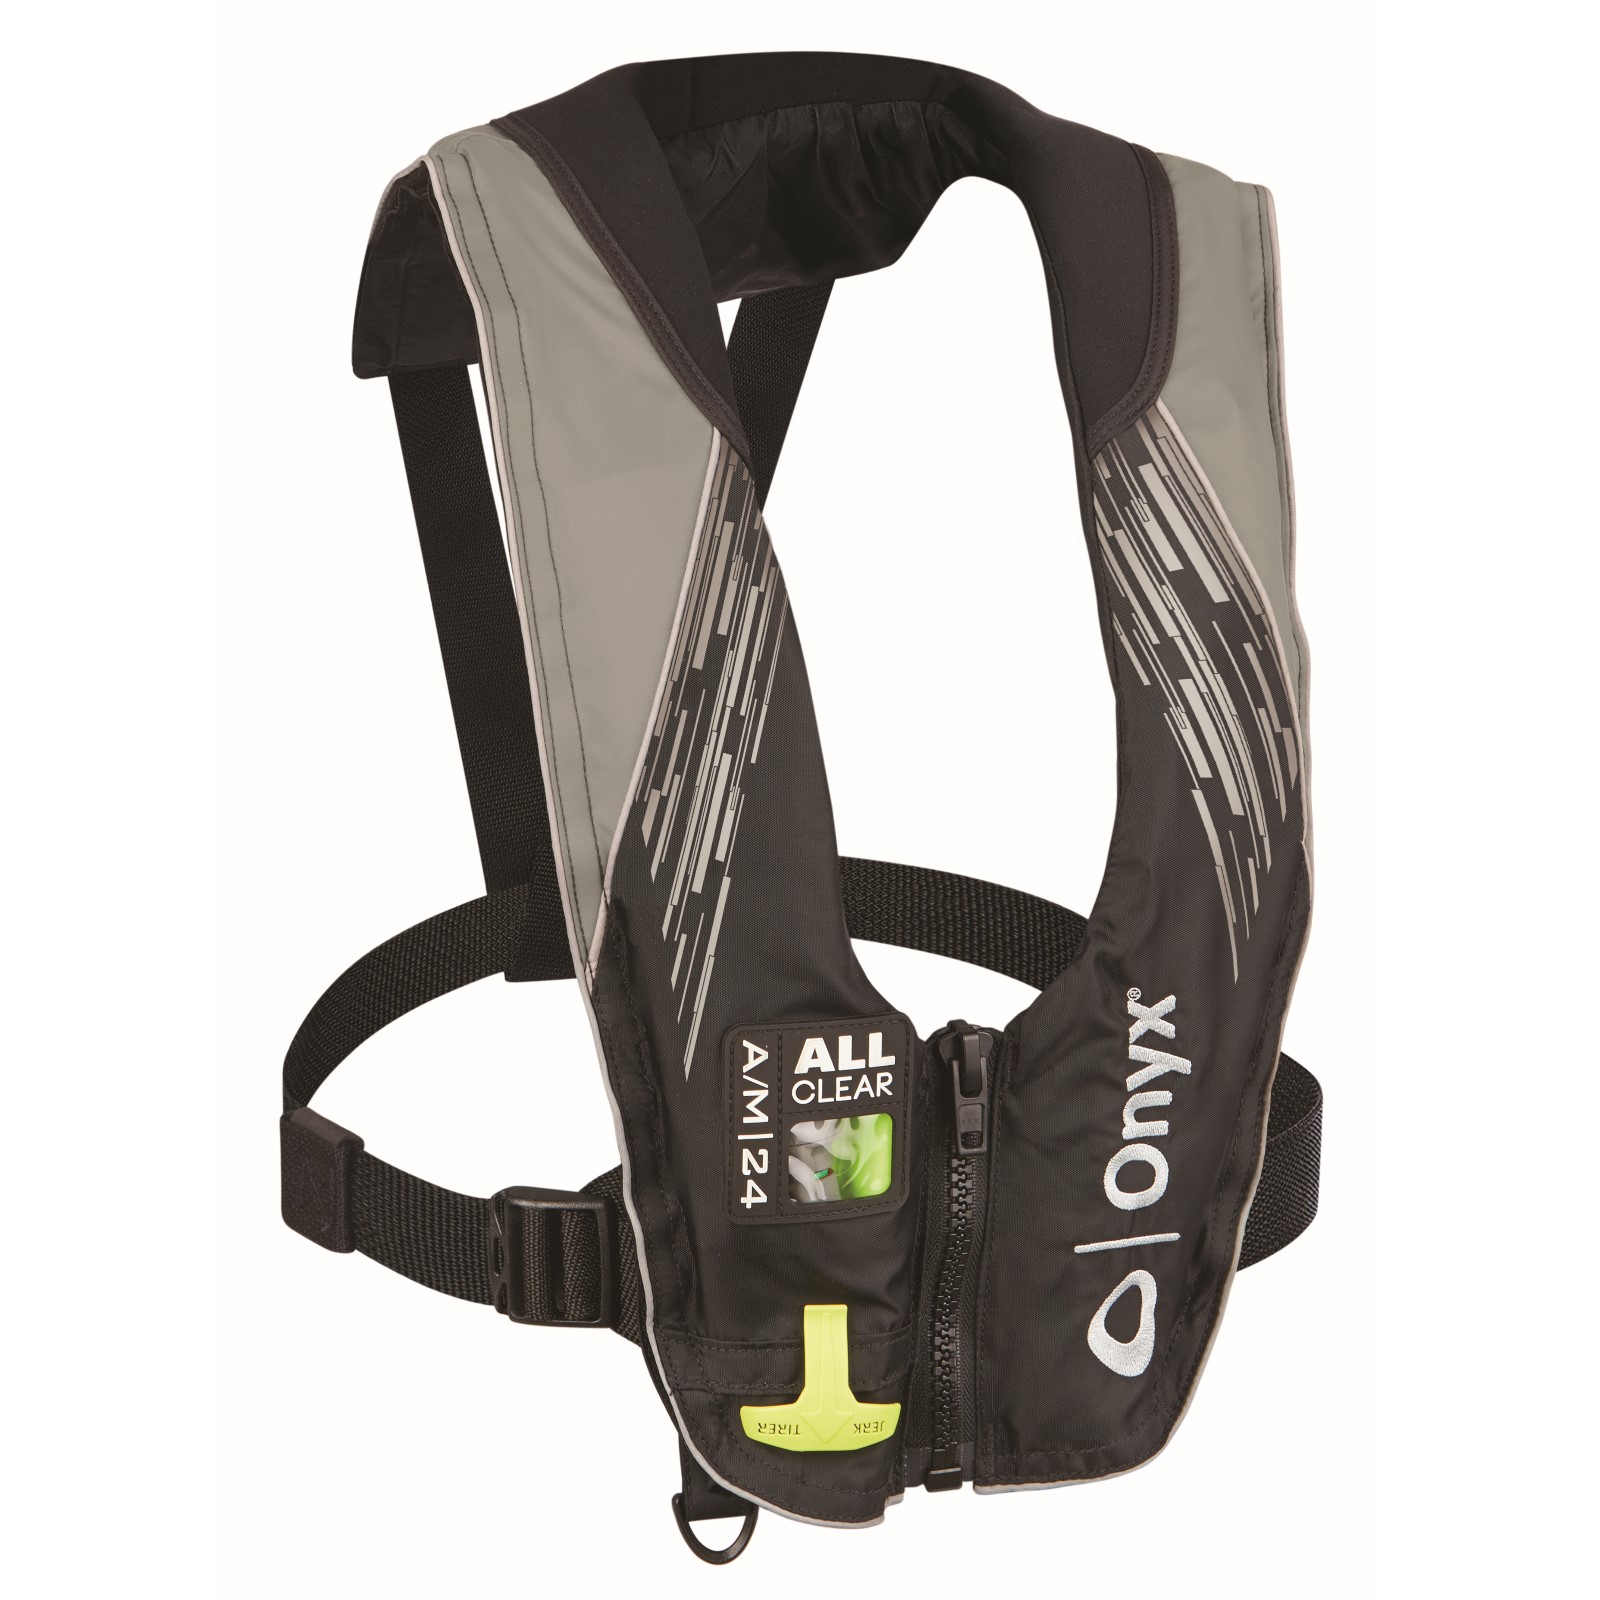 Onyx Nite Onyx Outdoor Onyx A/M-24 Series All Clear Automatic/Manual Inflatable Life Jacket - Grey - Adult